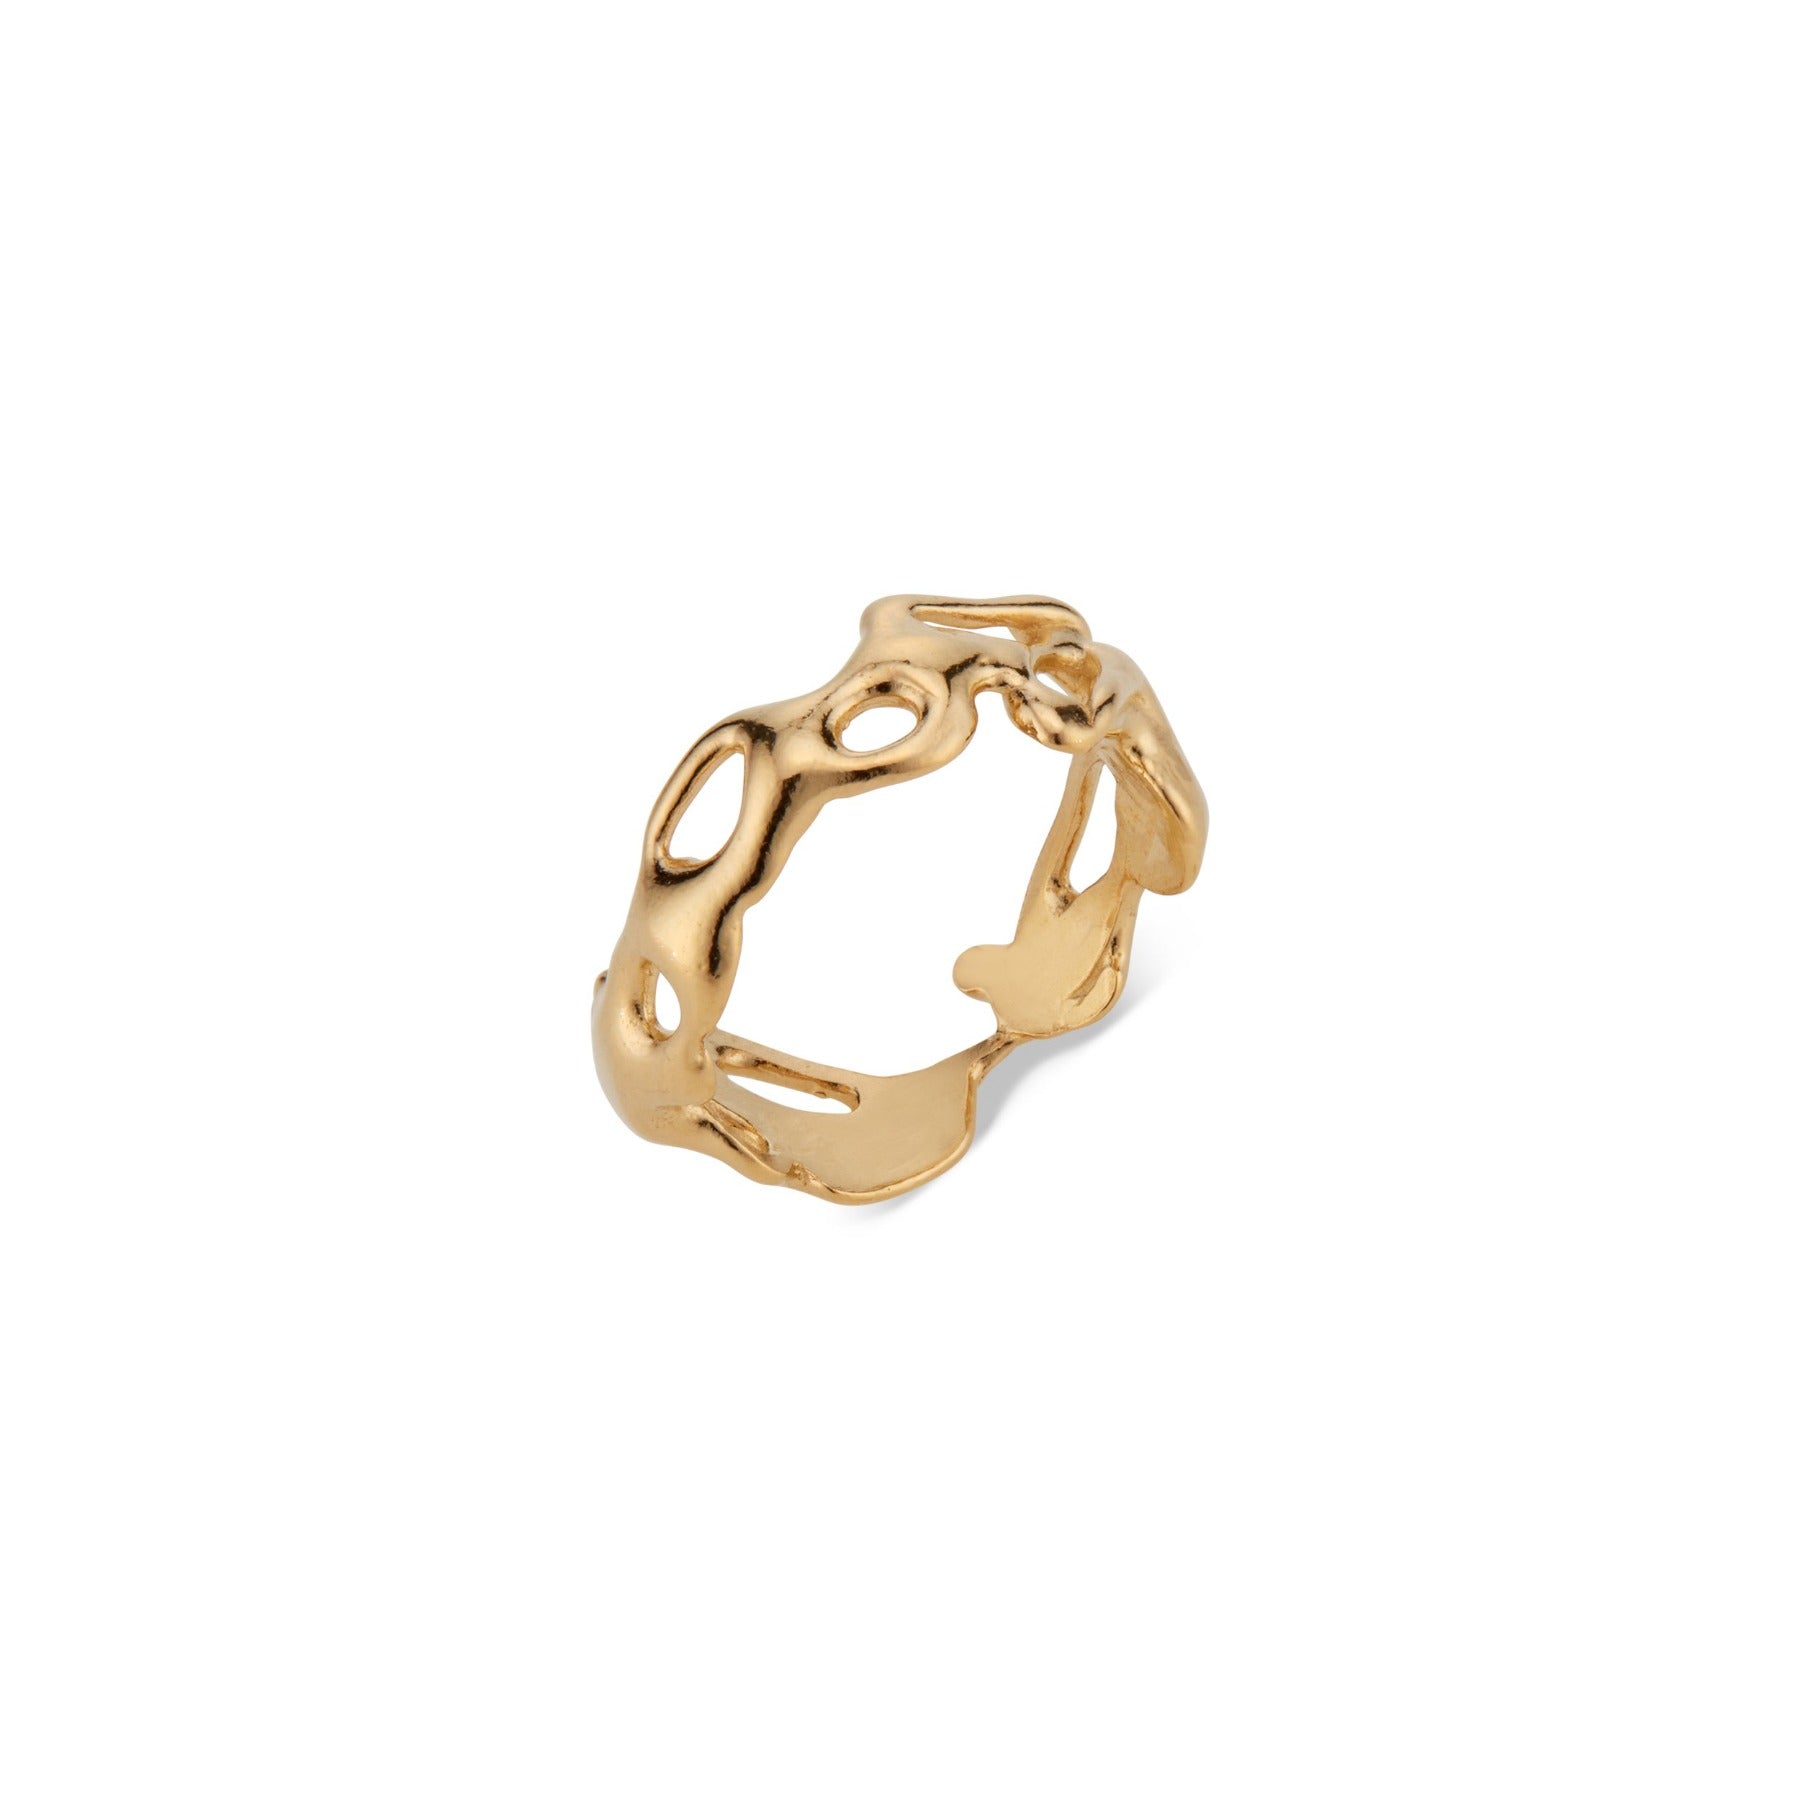 Abstract, squiggle band in 18k gold vermeil.